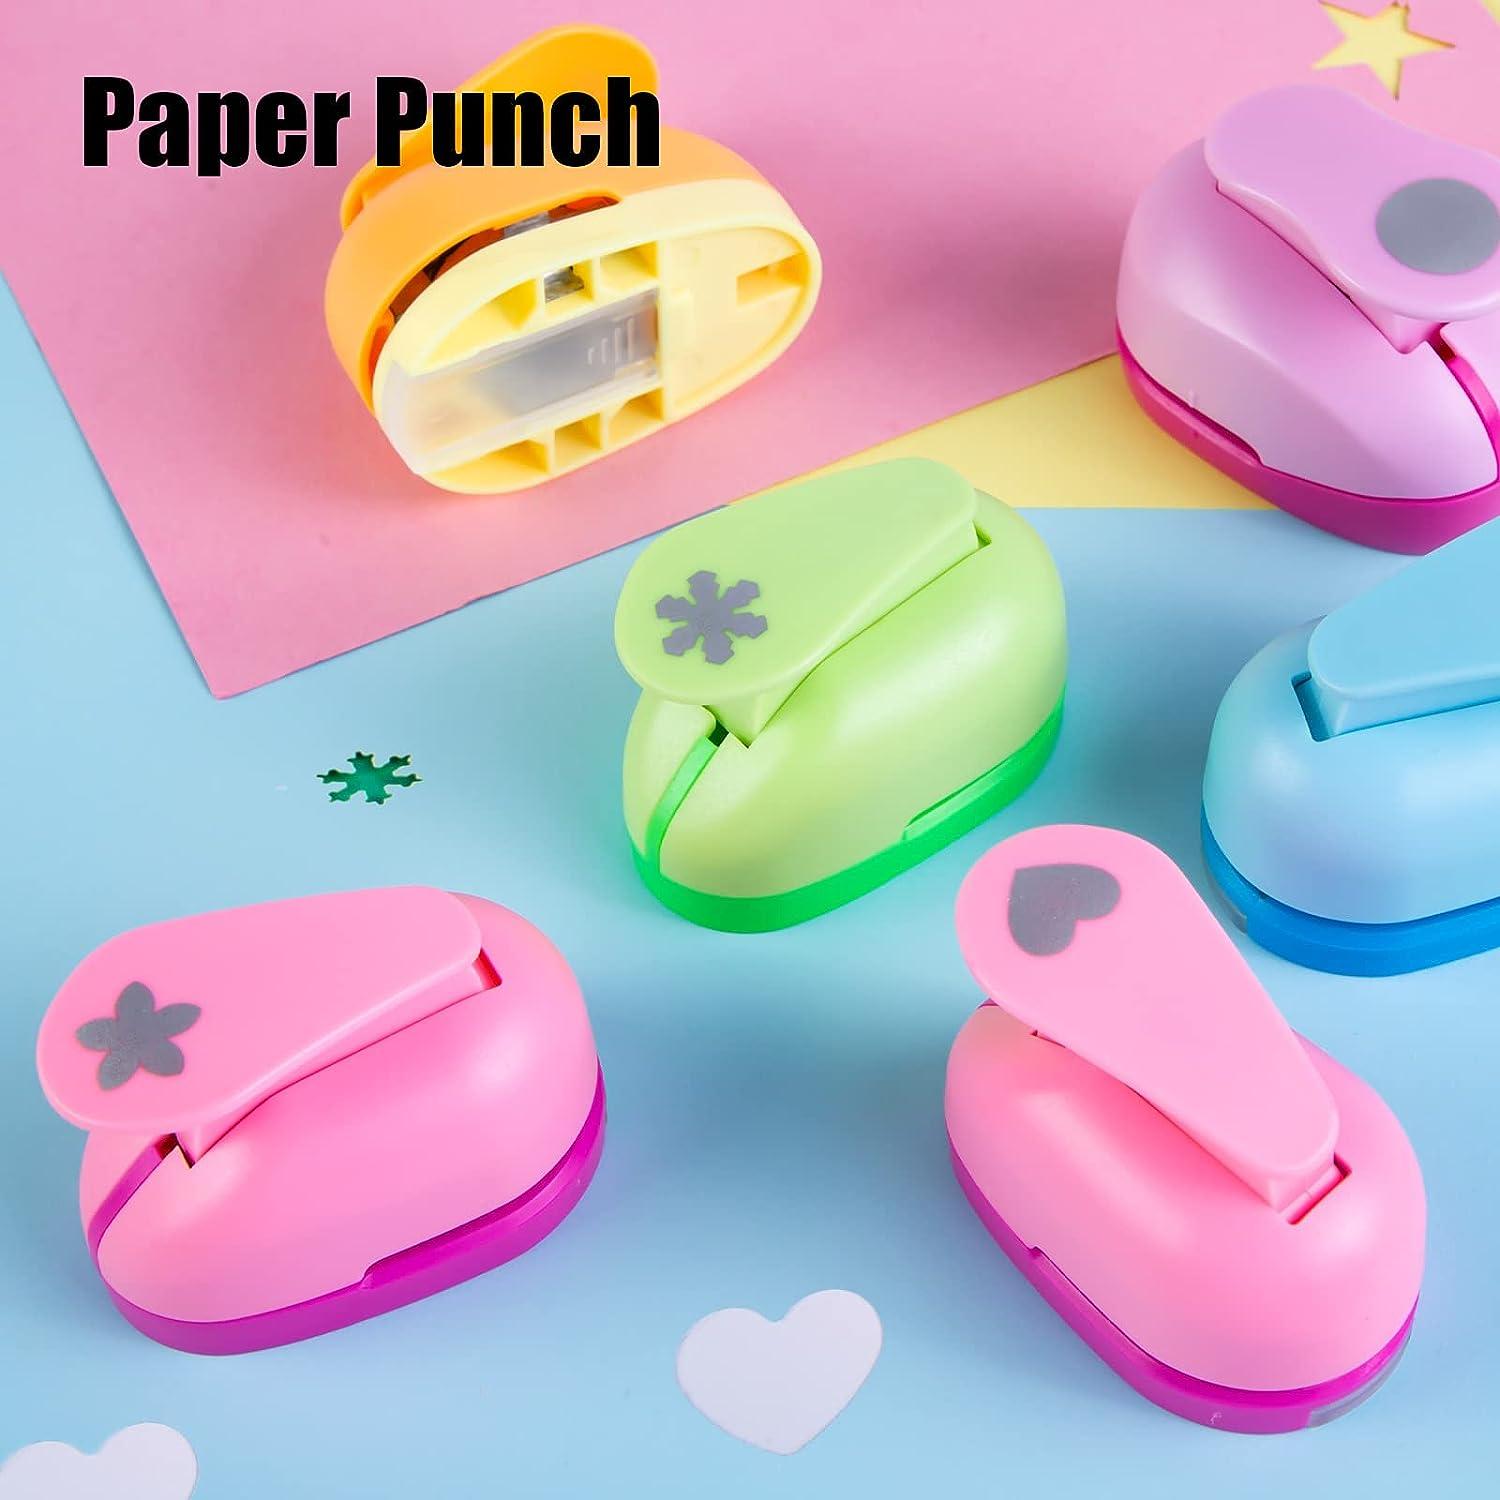  Hole Puncher - Paper Punches for Crafting, Hole Punch Shapes,  Star Hole Puncher, Hole Puncher for Crafts, Craft Supplies : Arts, Crafts &  Sewing